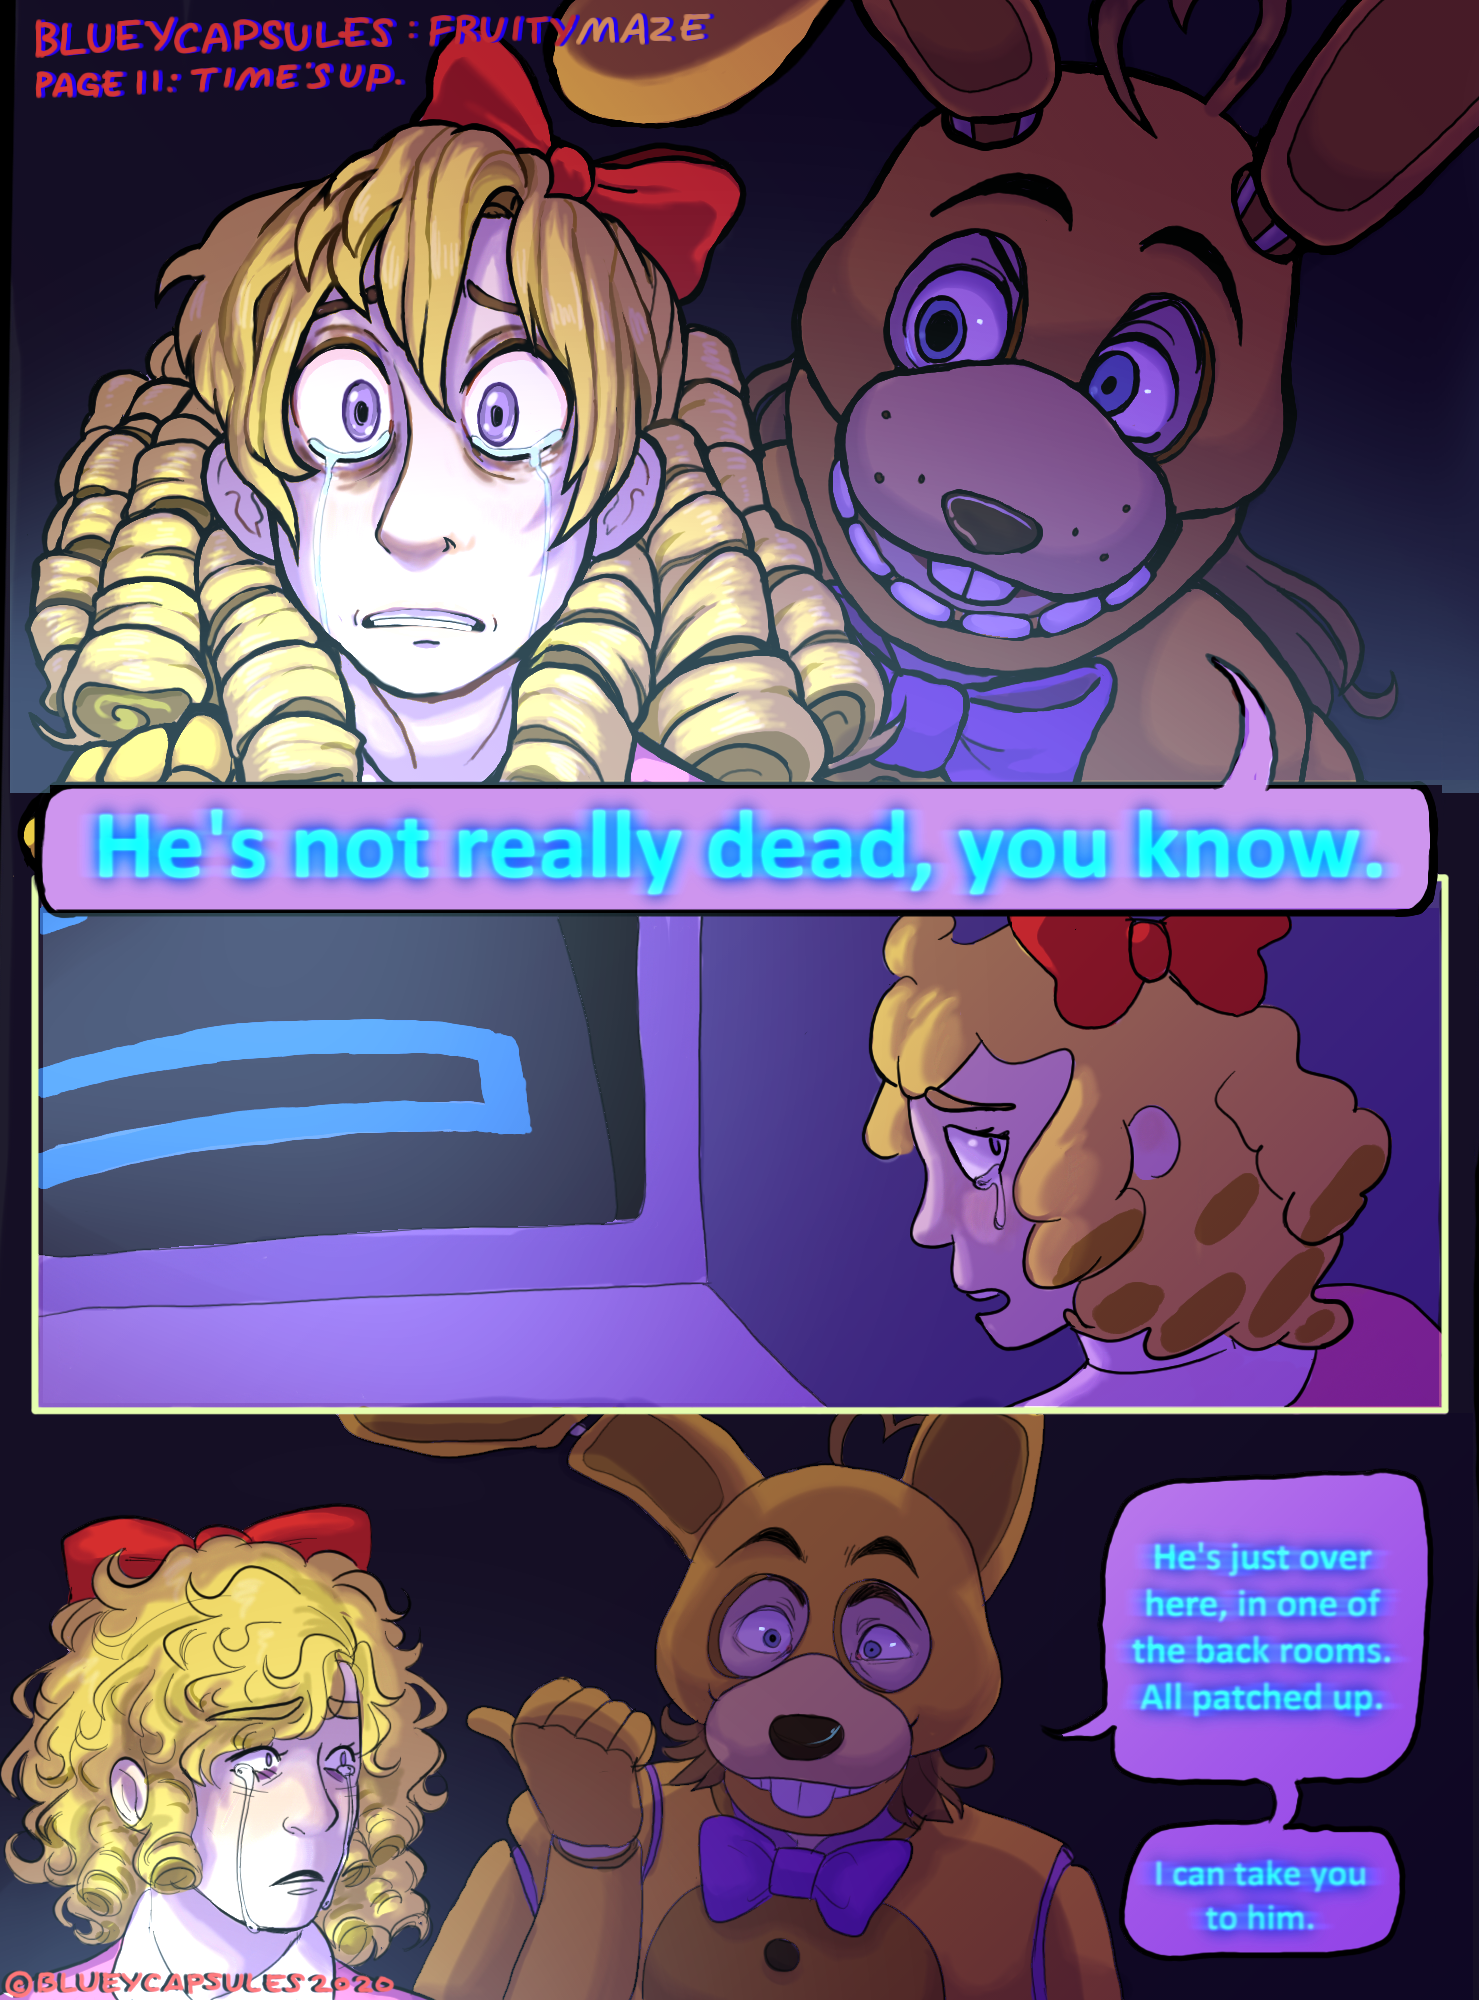 Bluey Capsules on Twitter  Fnaf funny, Fnaf, In this moment